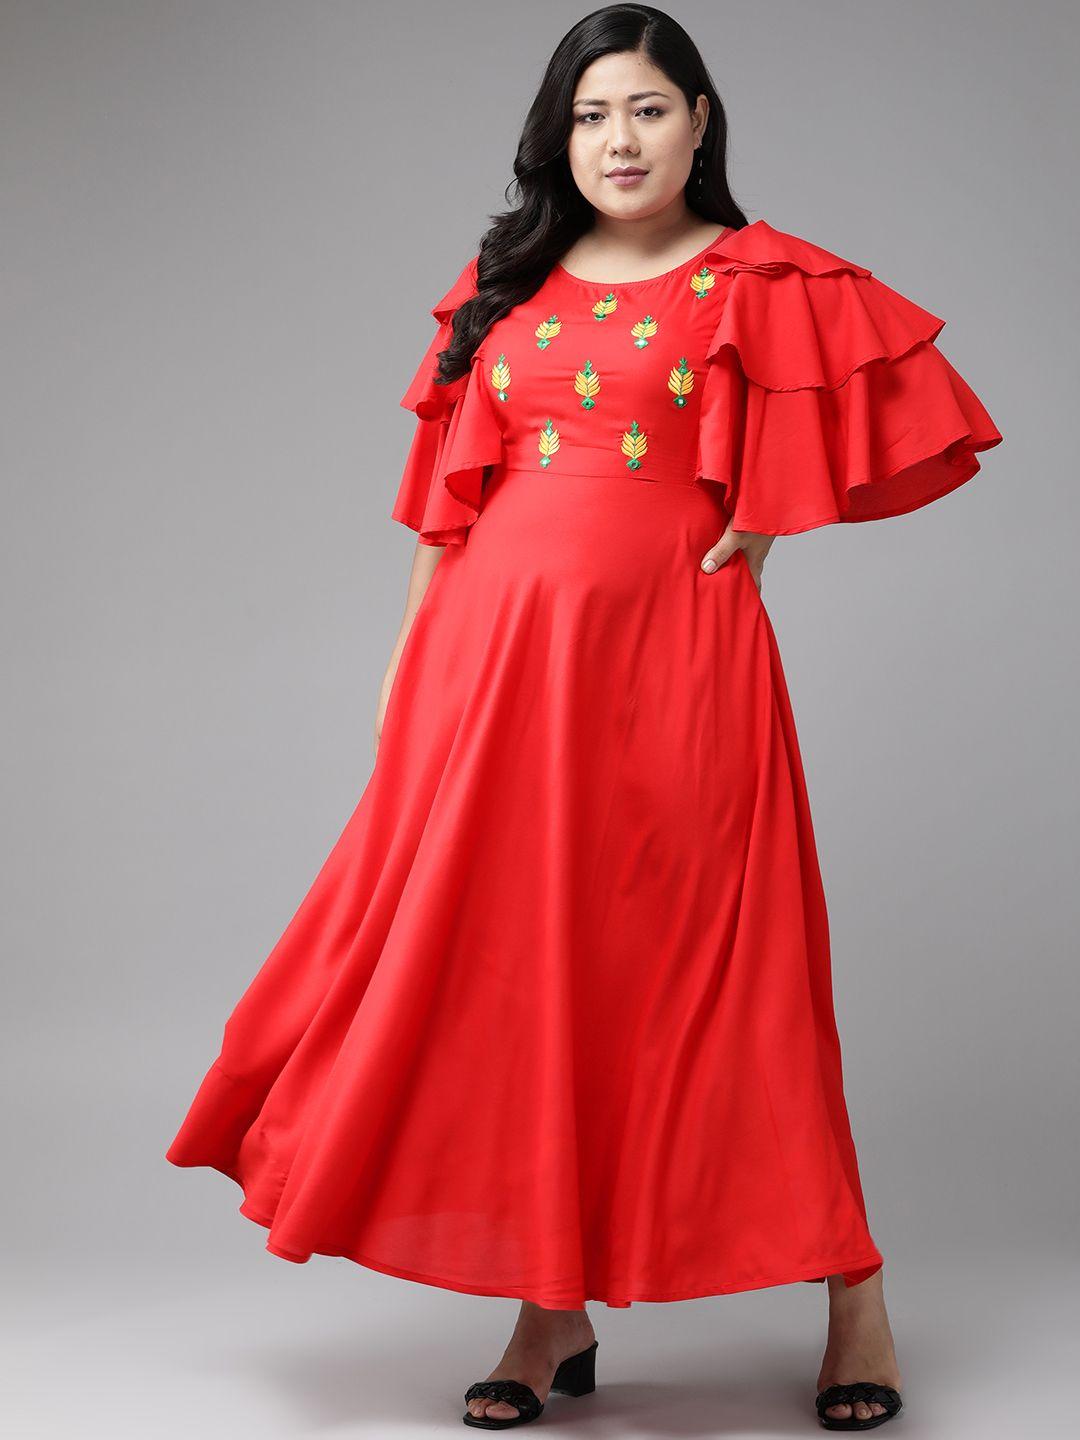 yash-gallery-plus-size-red-ethnic-motifs-embroidered-flutter-sleeves-maxi-dress